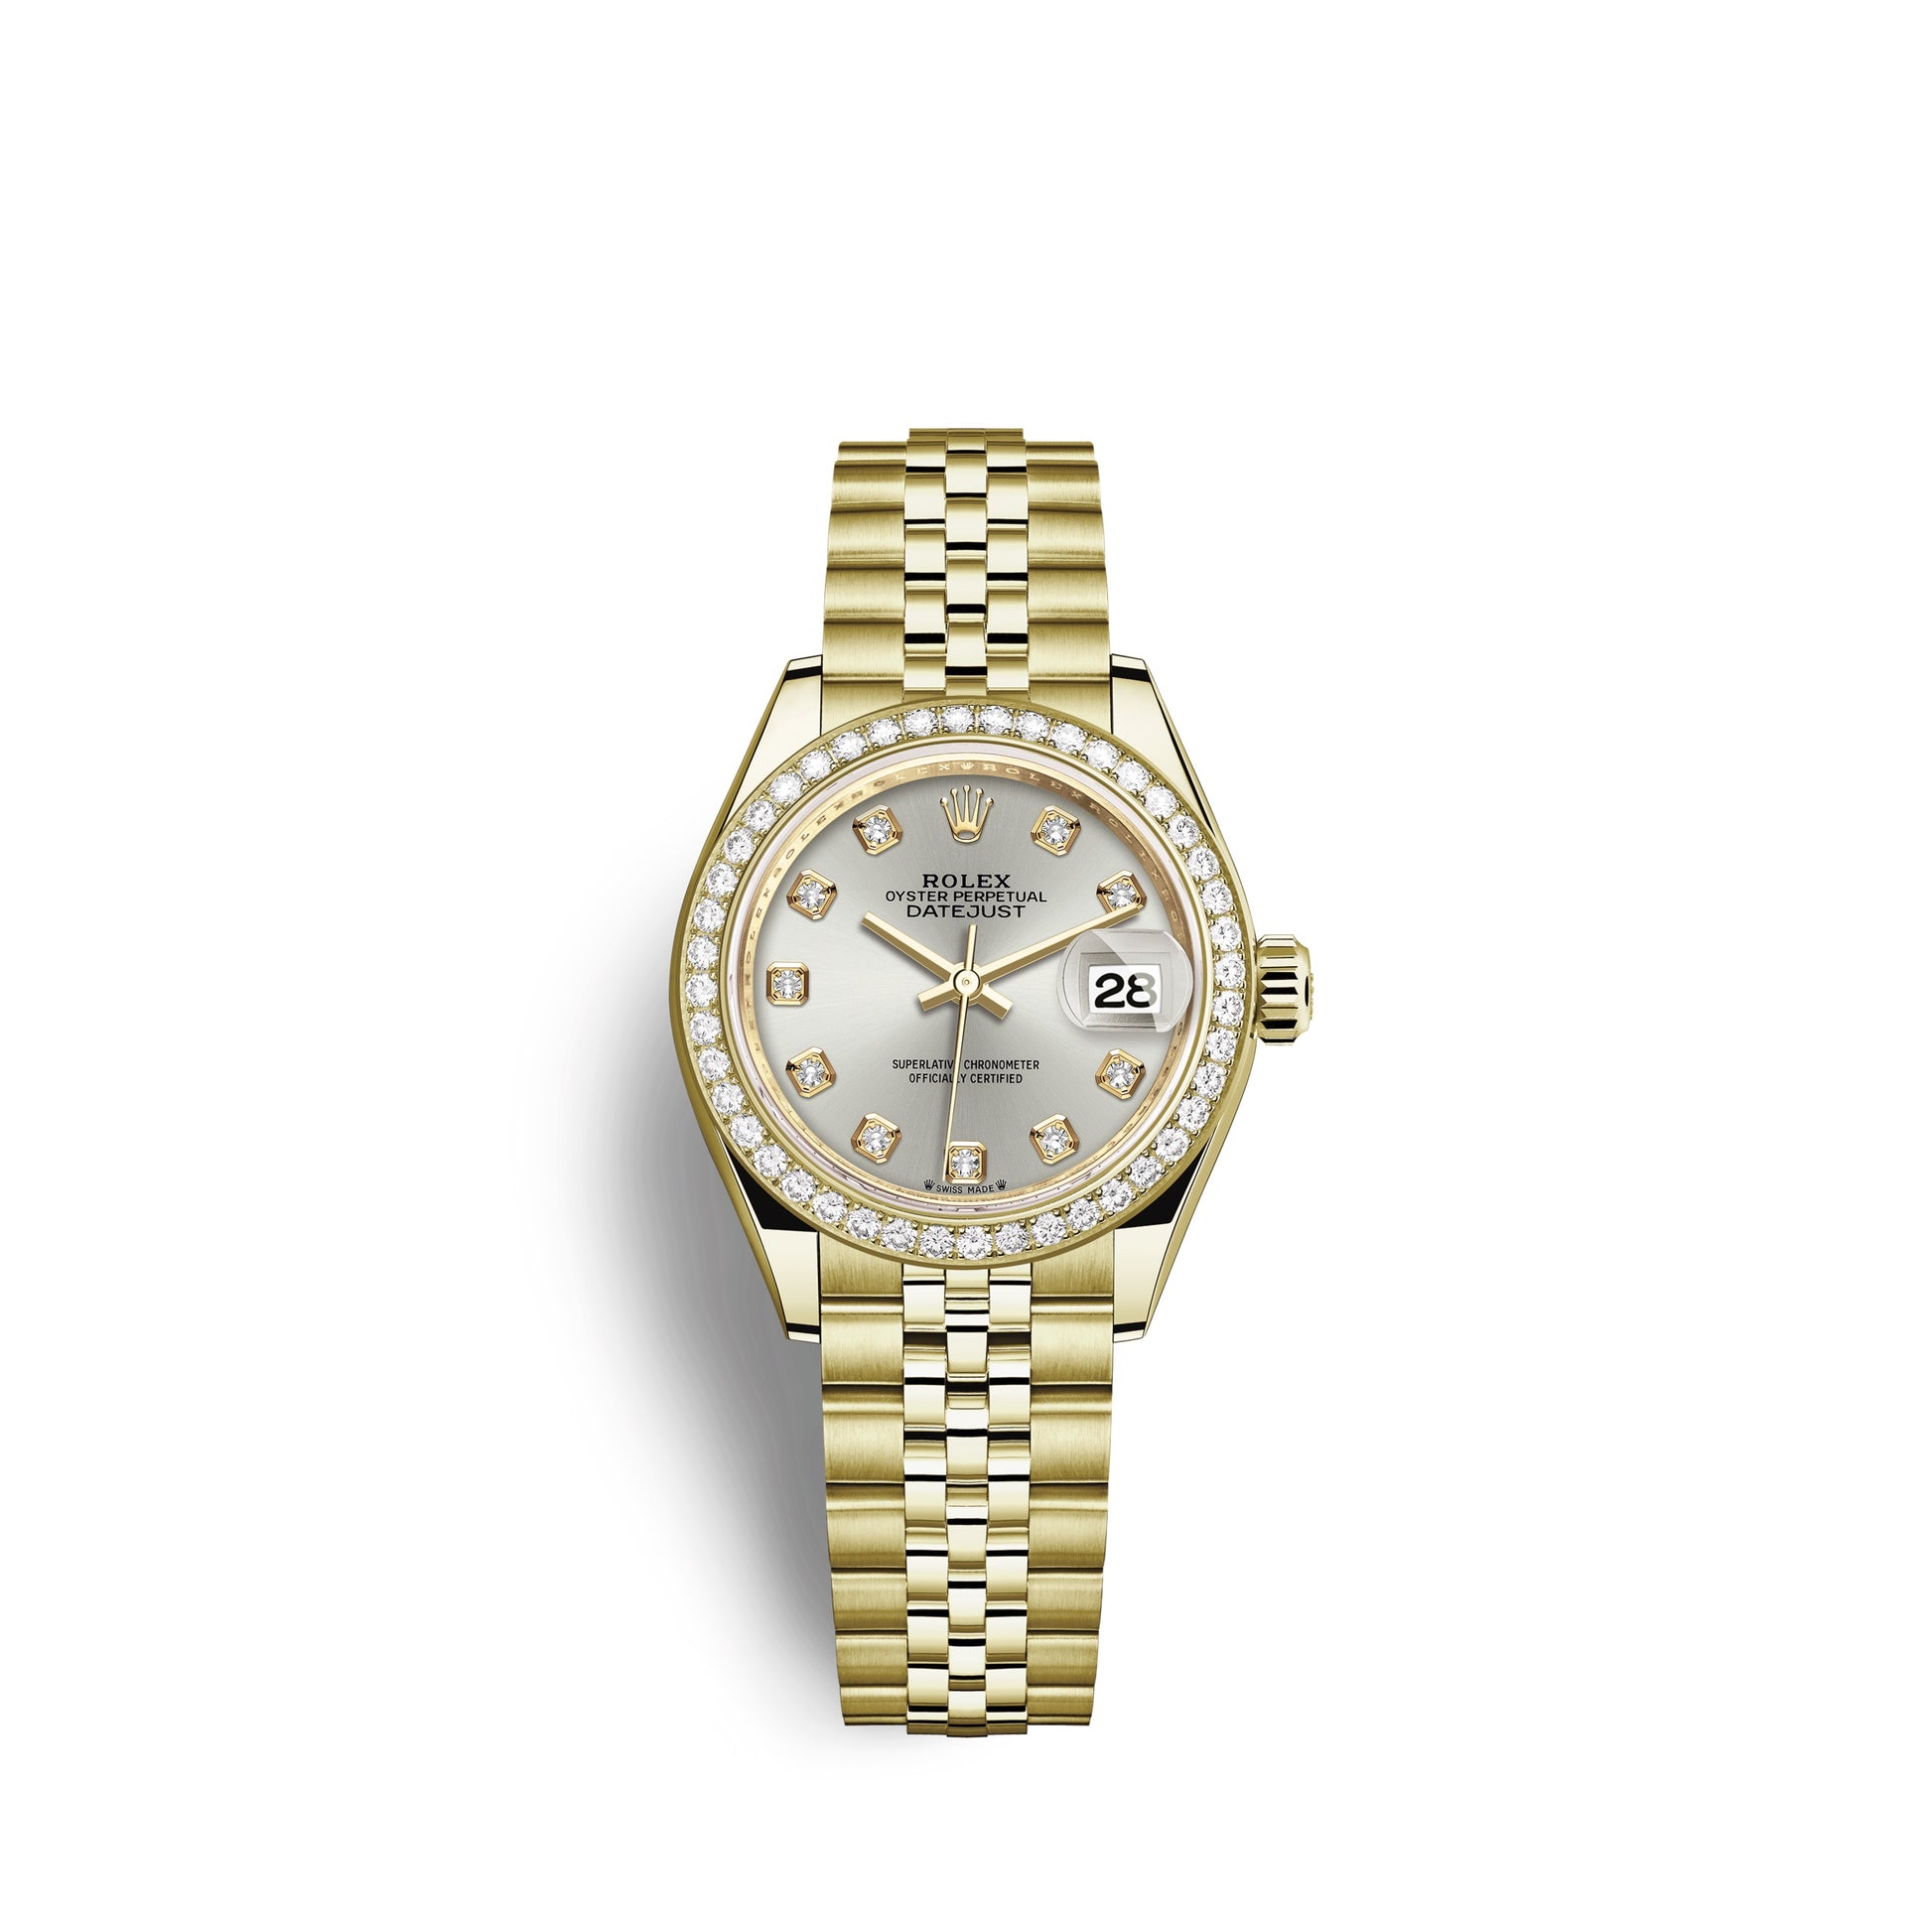 Rolex Lady-Datejust 28, 18kt Yellow Gold and diamonds, Ref# 279138RBR-0020